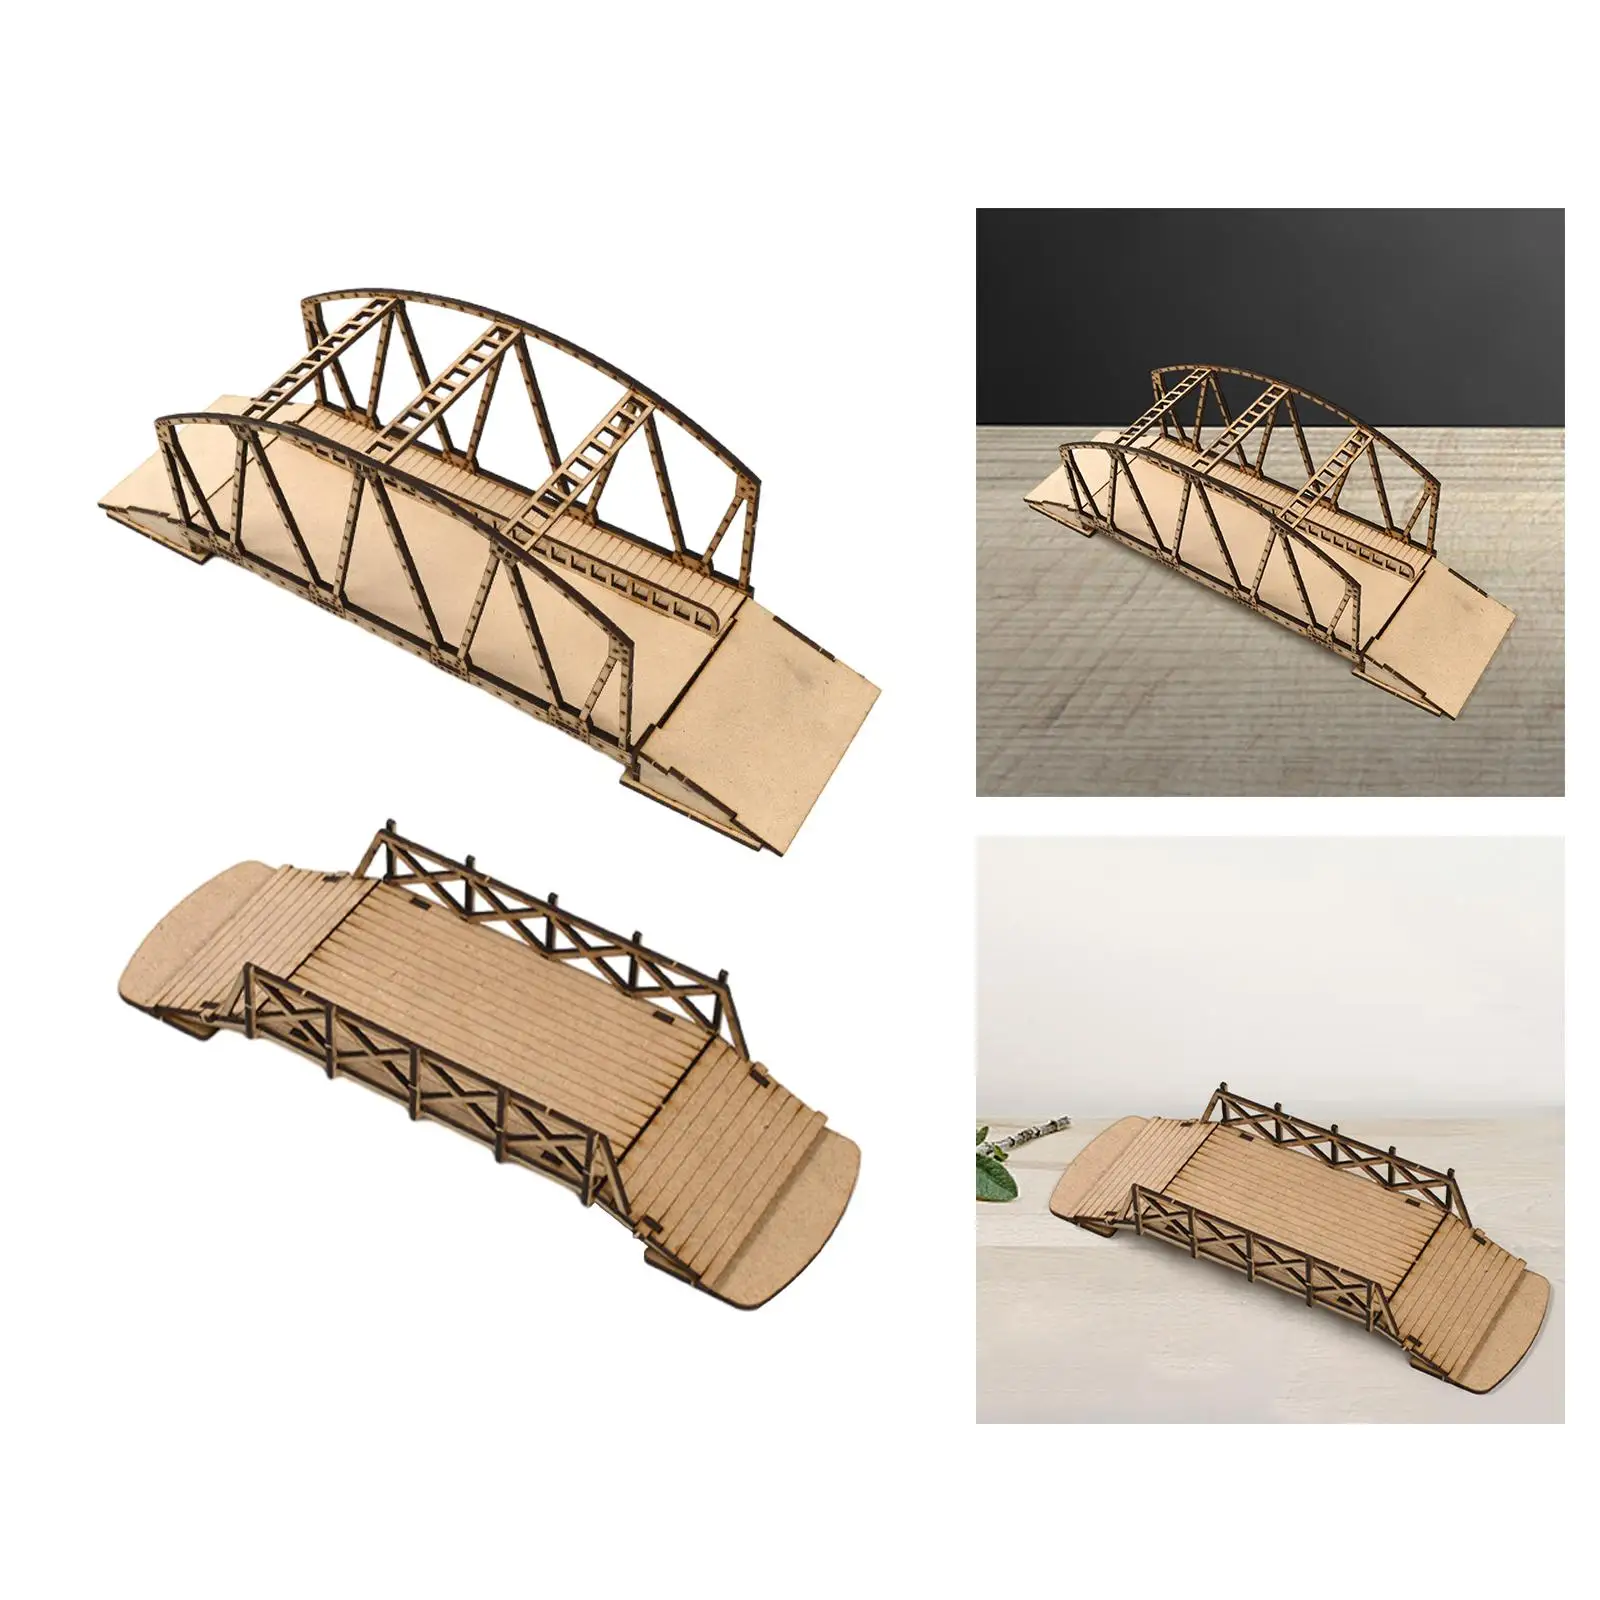 1/72 Scale Wooden Bridge Model Crafting Gift Wood Construction for Kids Adults Children Boys Girls Diorama Micro Landscape